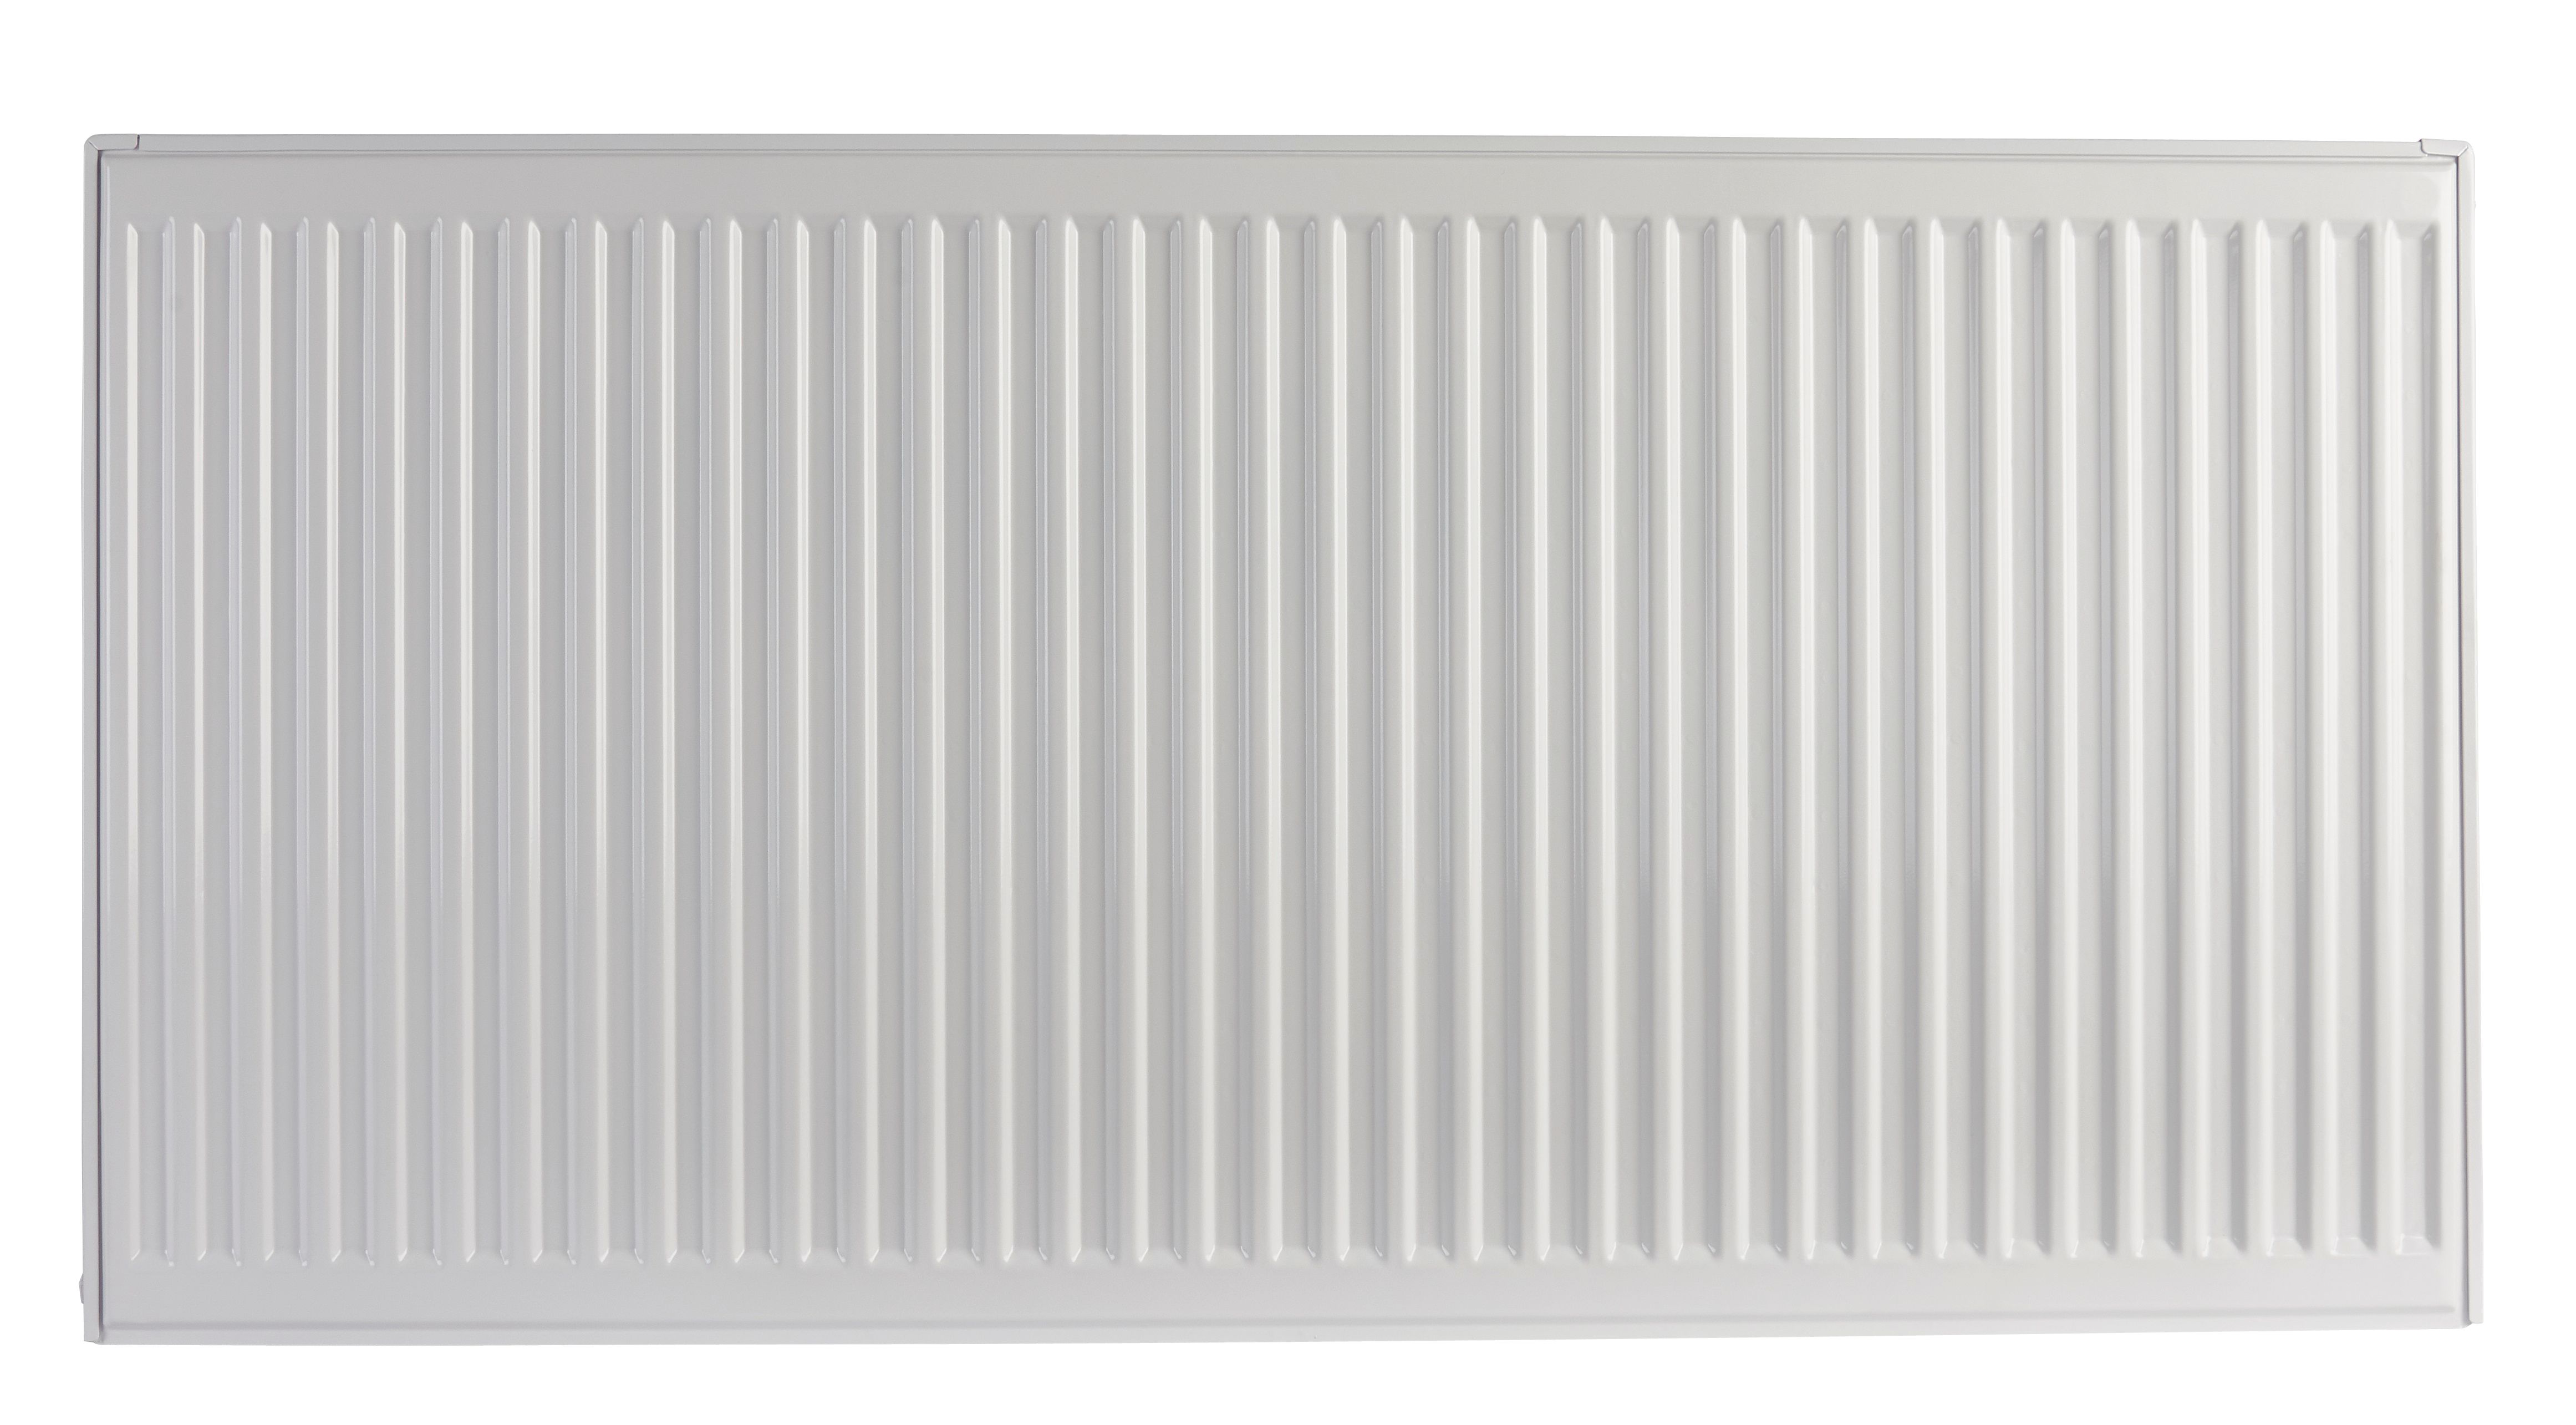 Image of Homeline by Stelrad 600 x 1000mm Type 11 Single Panel Single Convector Radiator